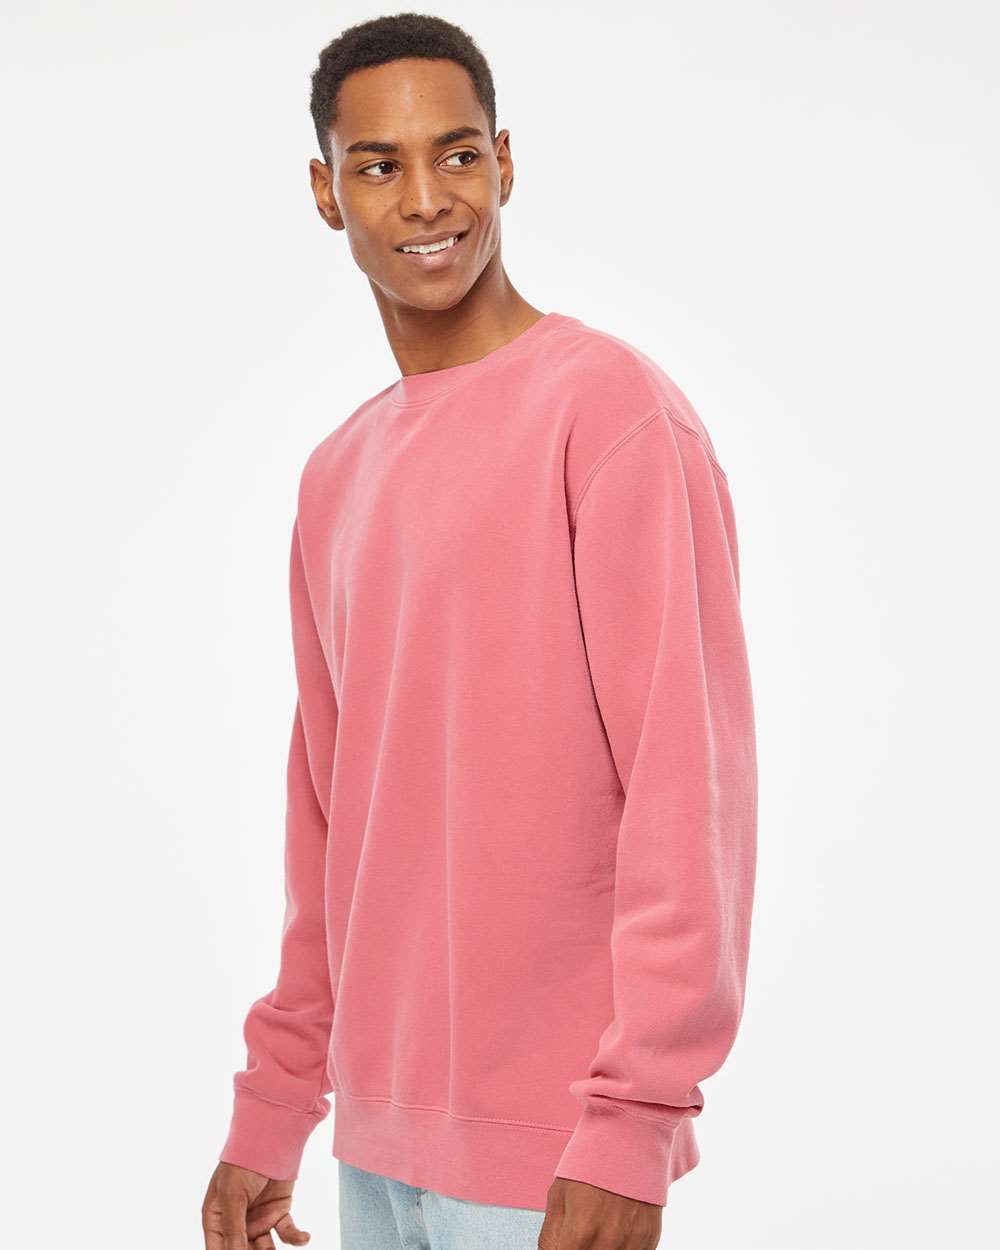 Independent Trading Co. Unisex Midweight Pigment-Dyed Crewneck Sweatshirt PRM3500 #colormdl_Pigment Pink